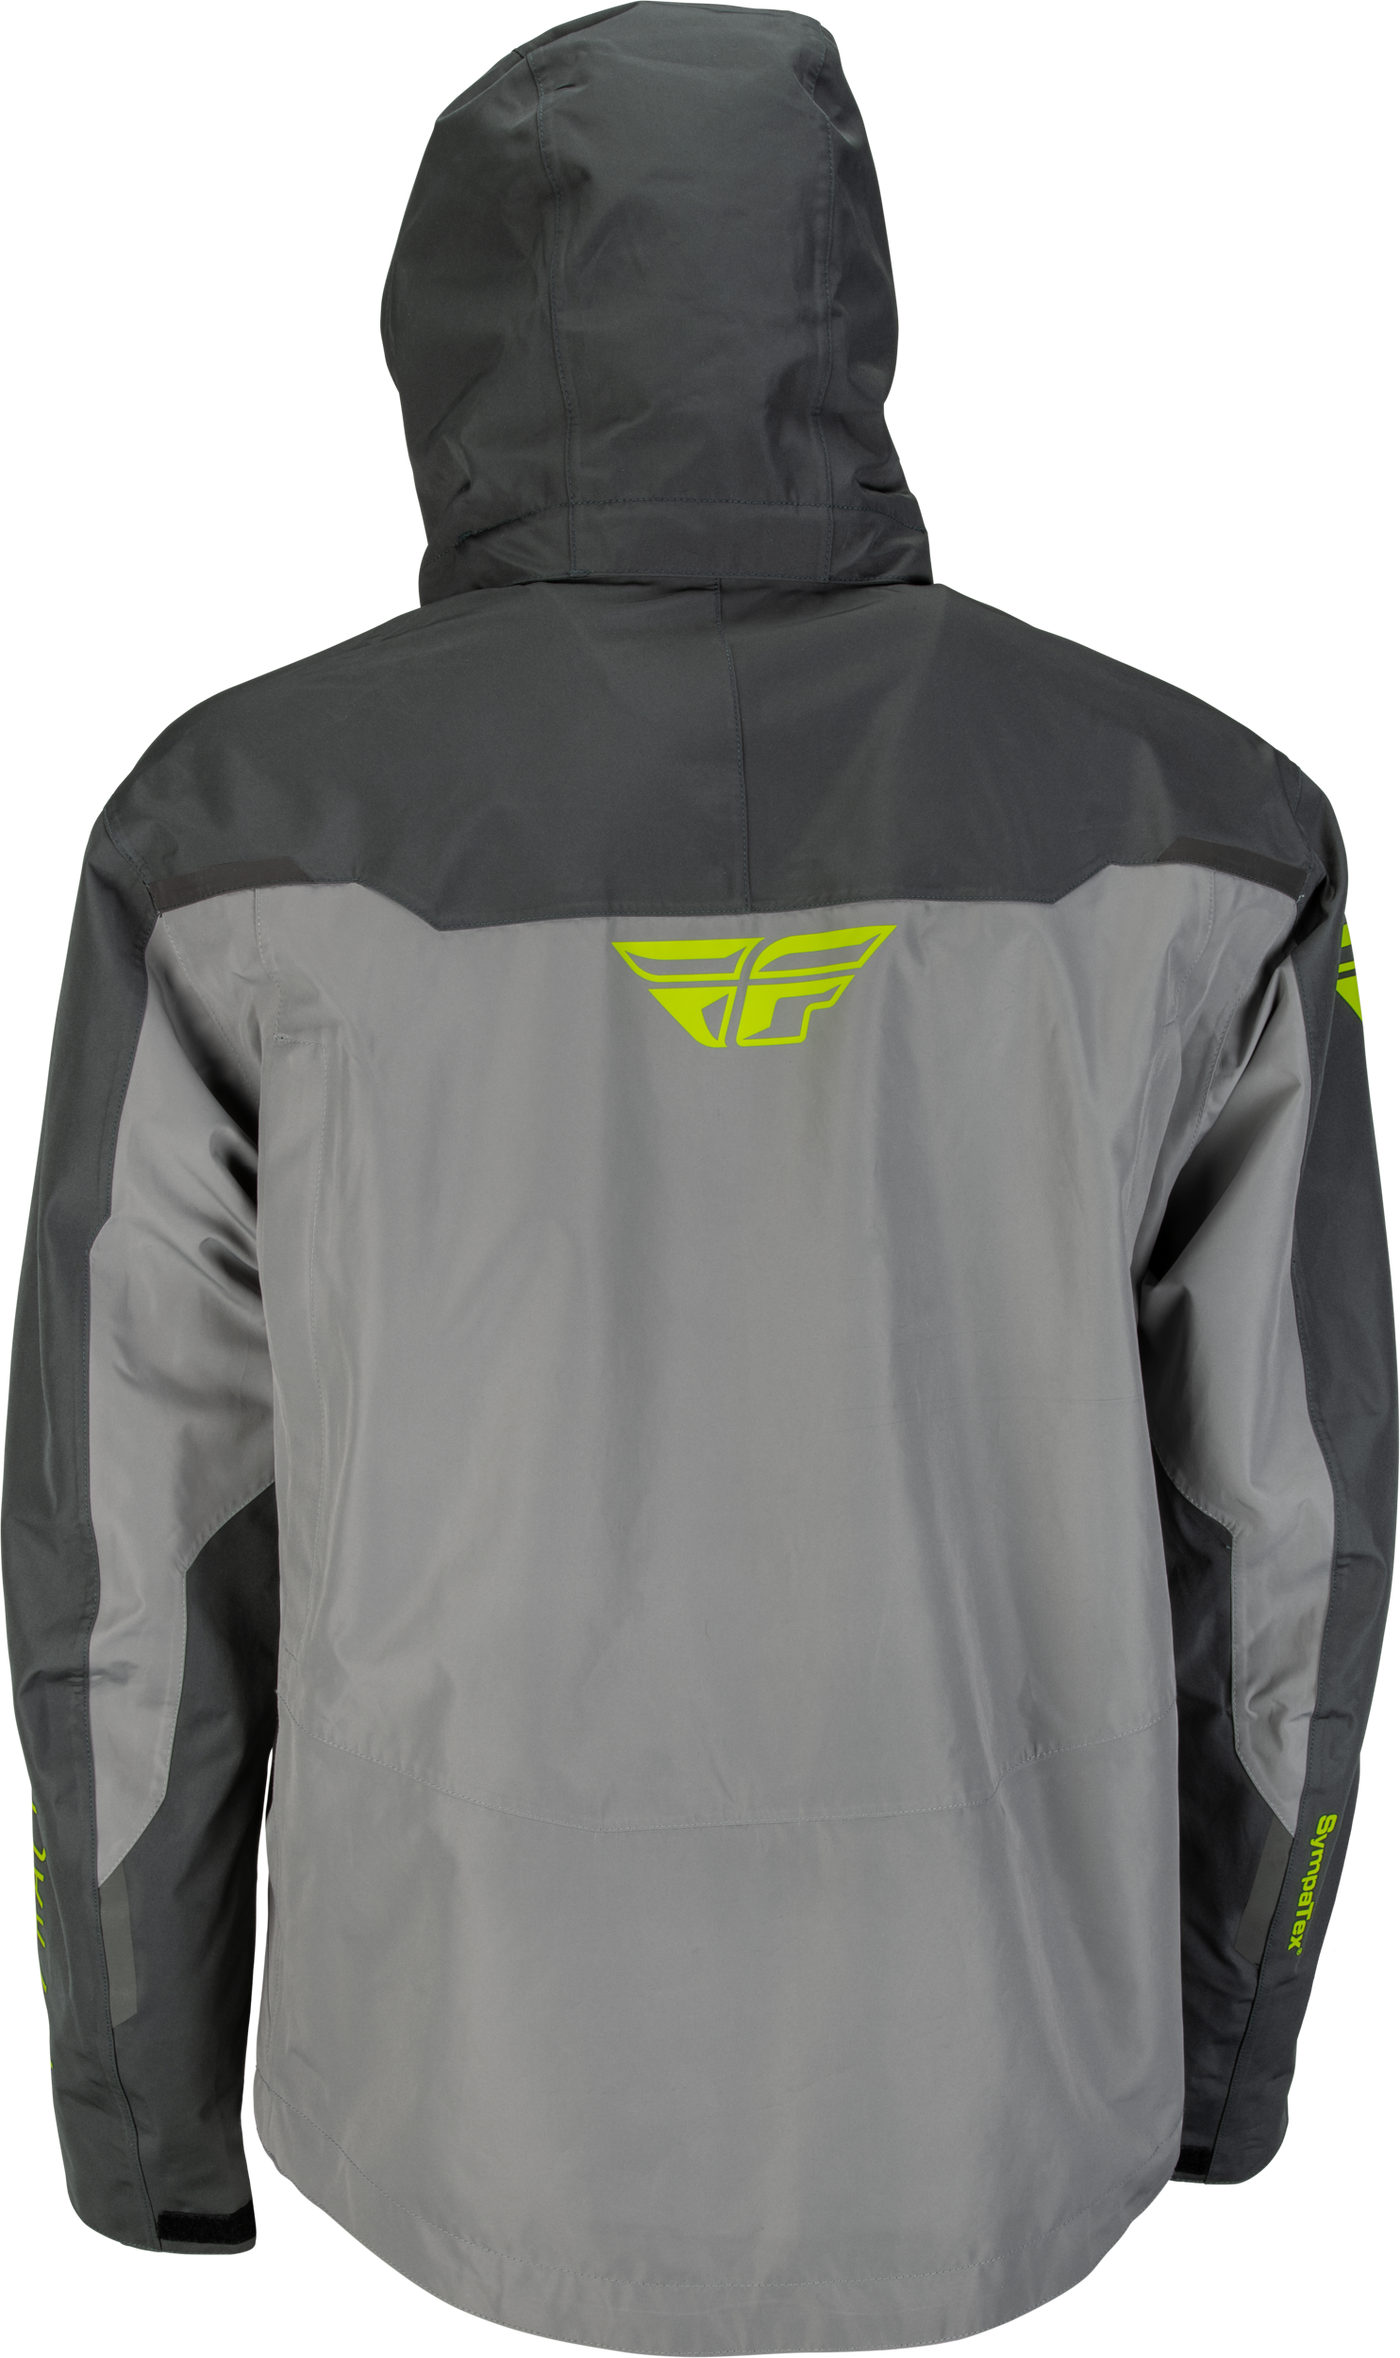 FLY Incline Jacket